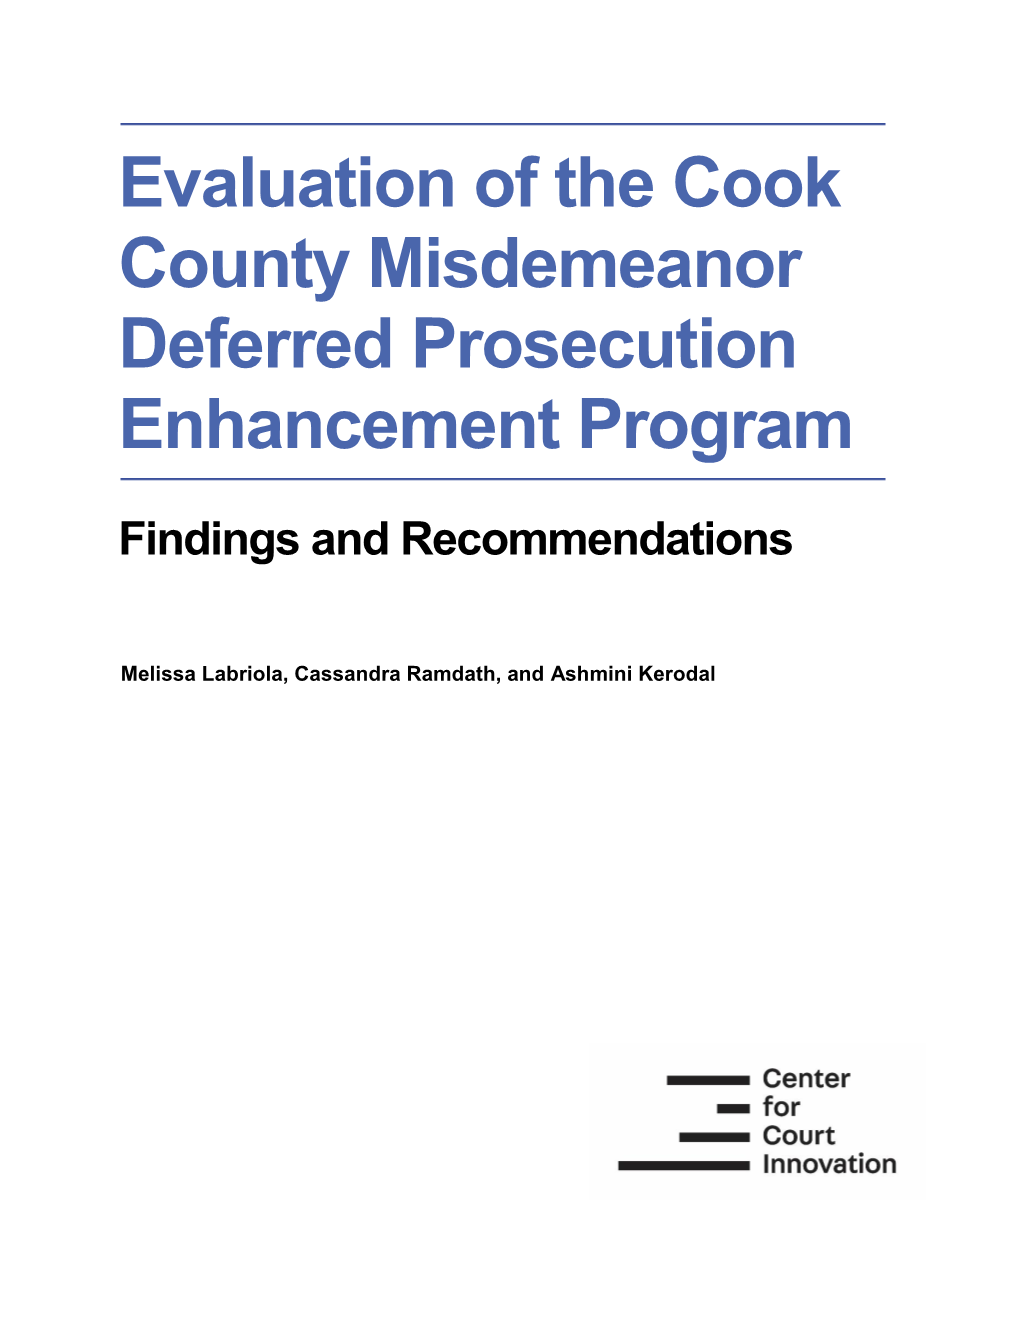 Evaluation of the Cook County Misdemeanor Deferred Prosecution Enhancement Program